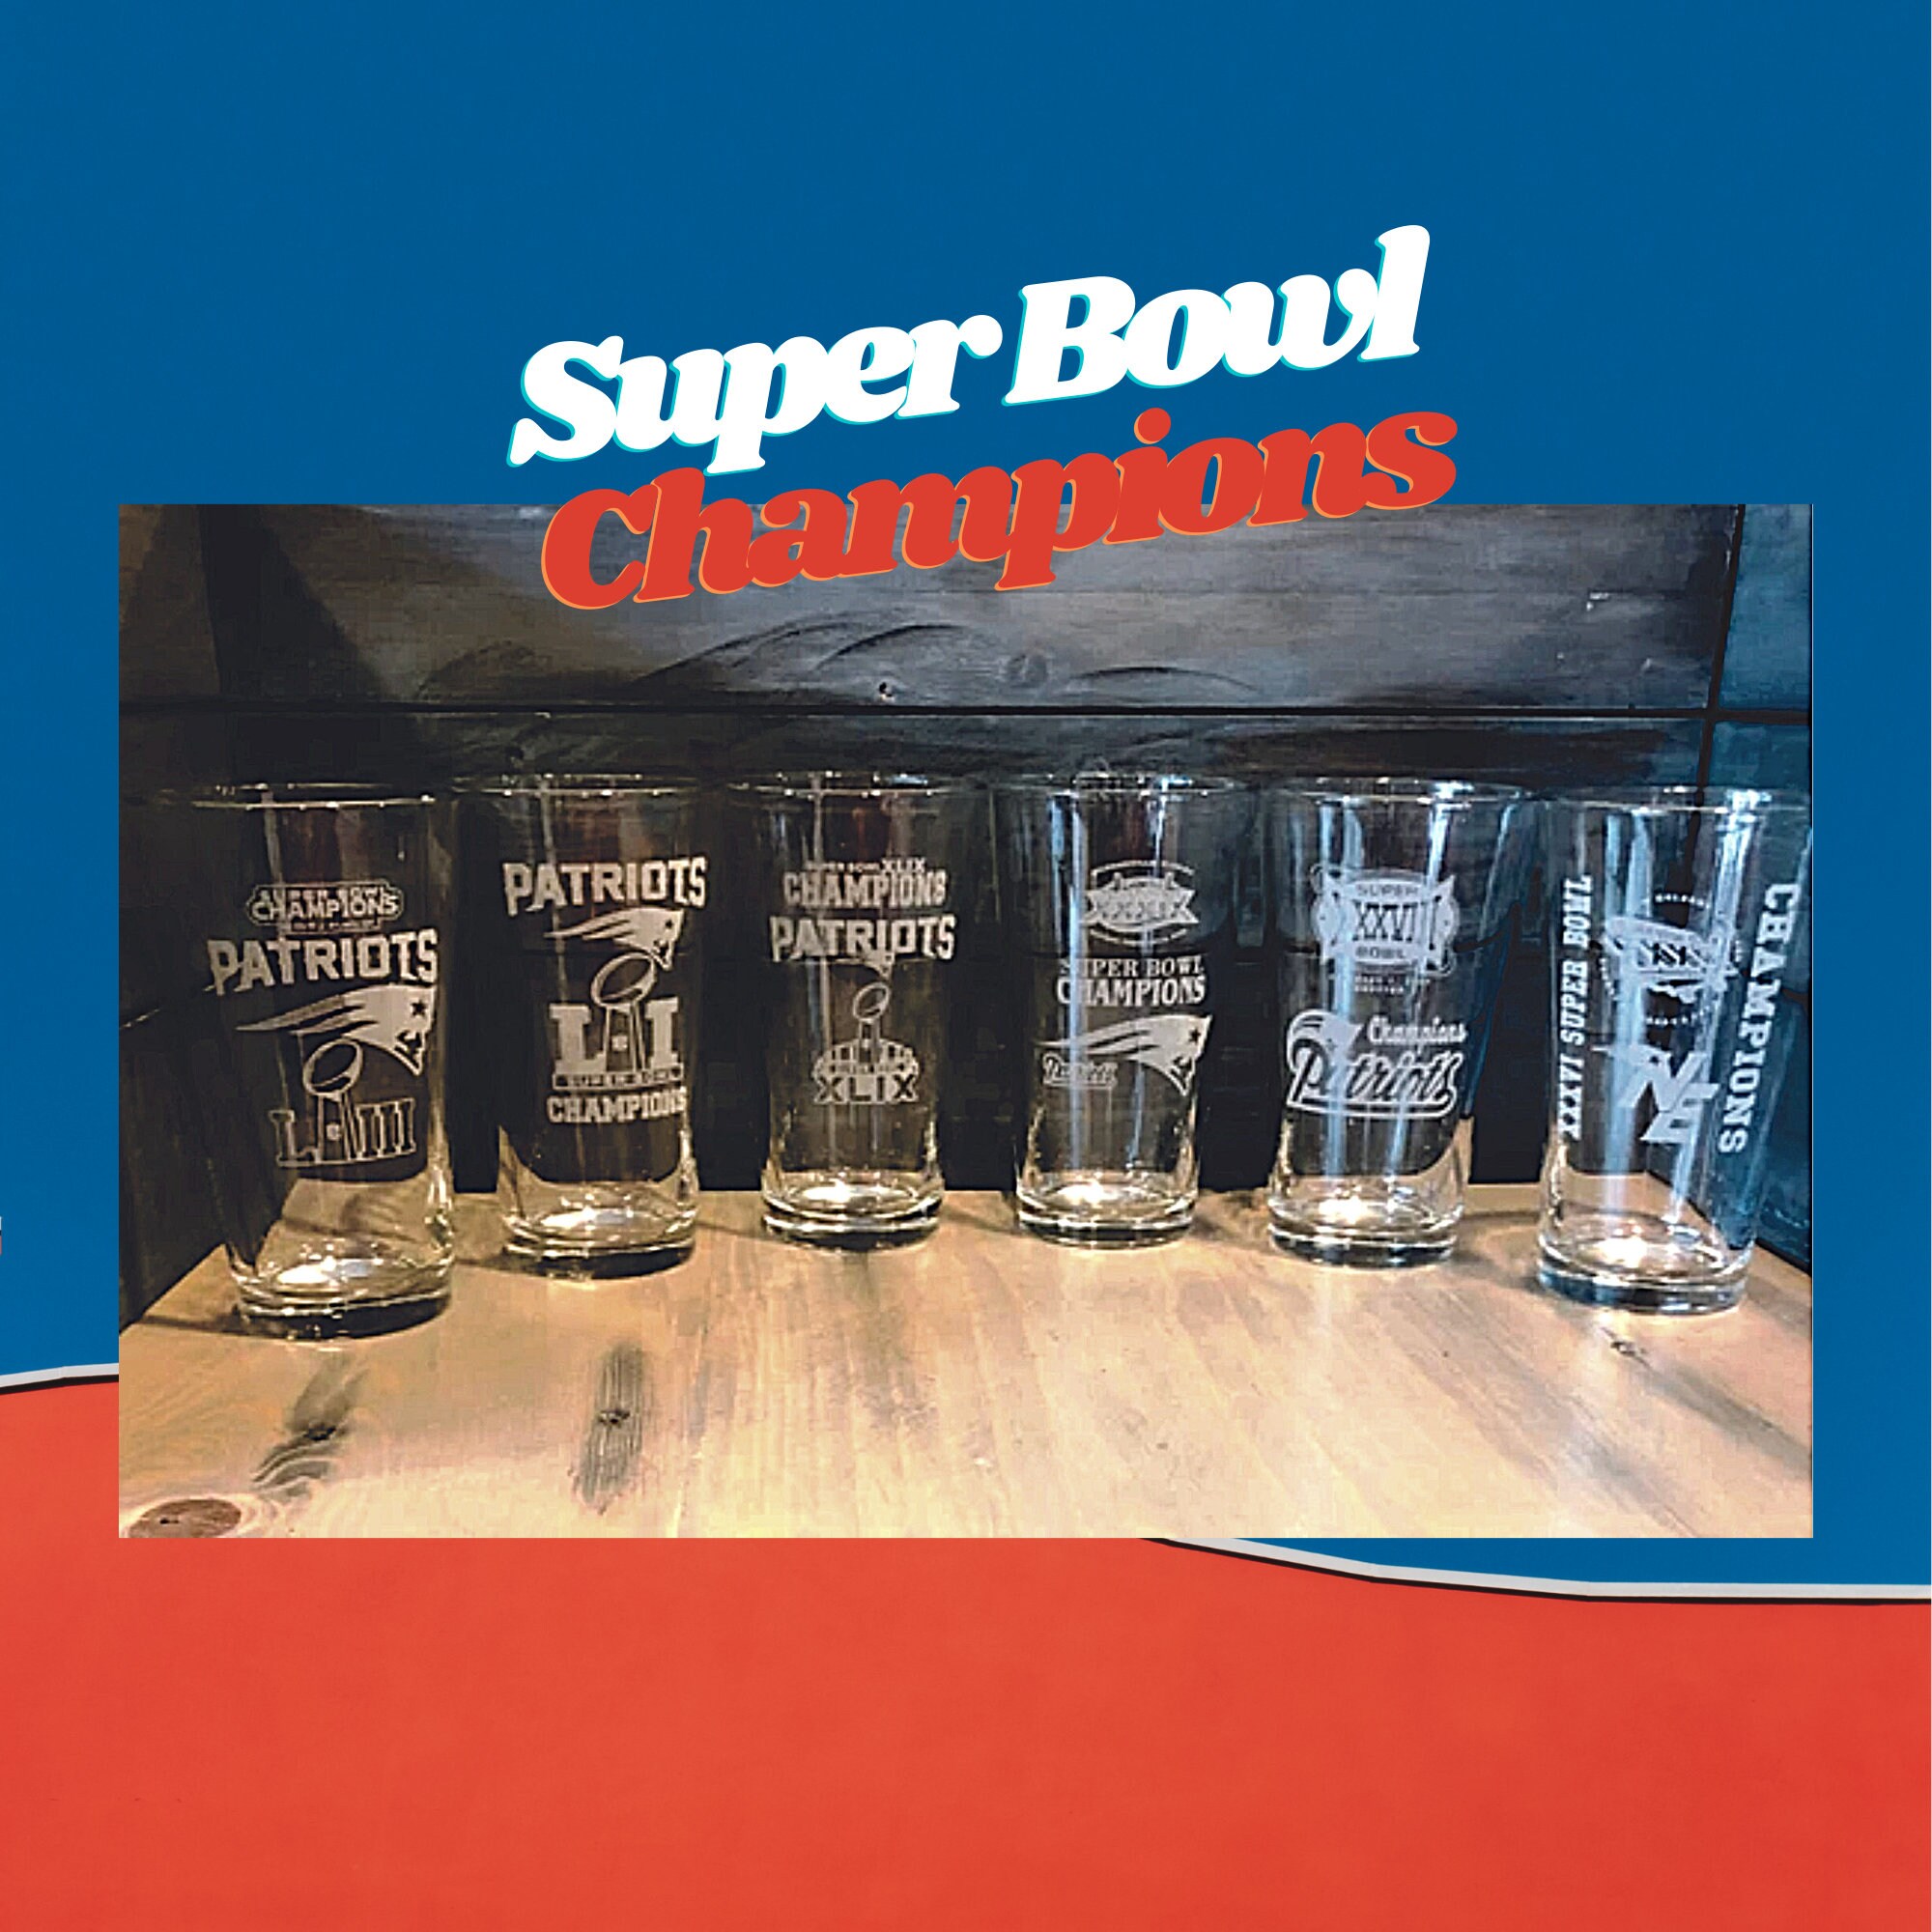 SUPER BOWL LV coffee cup X 3 Cups